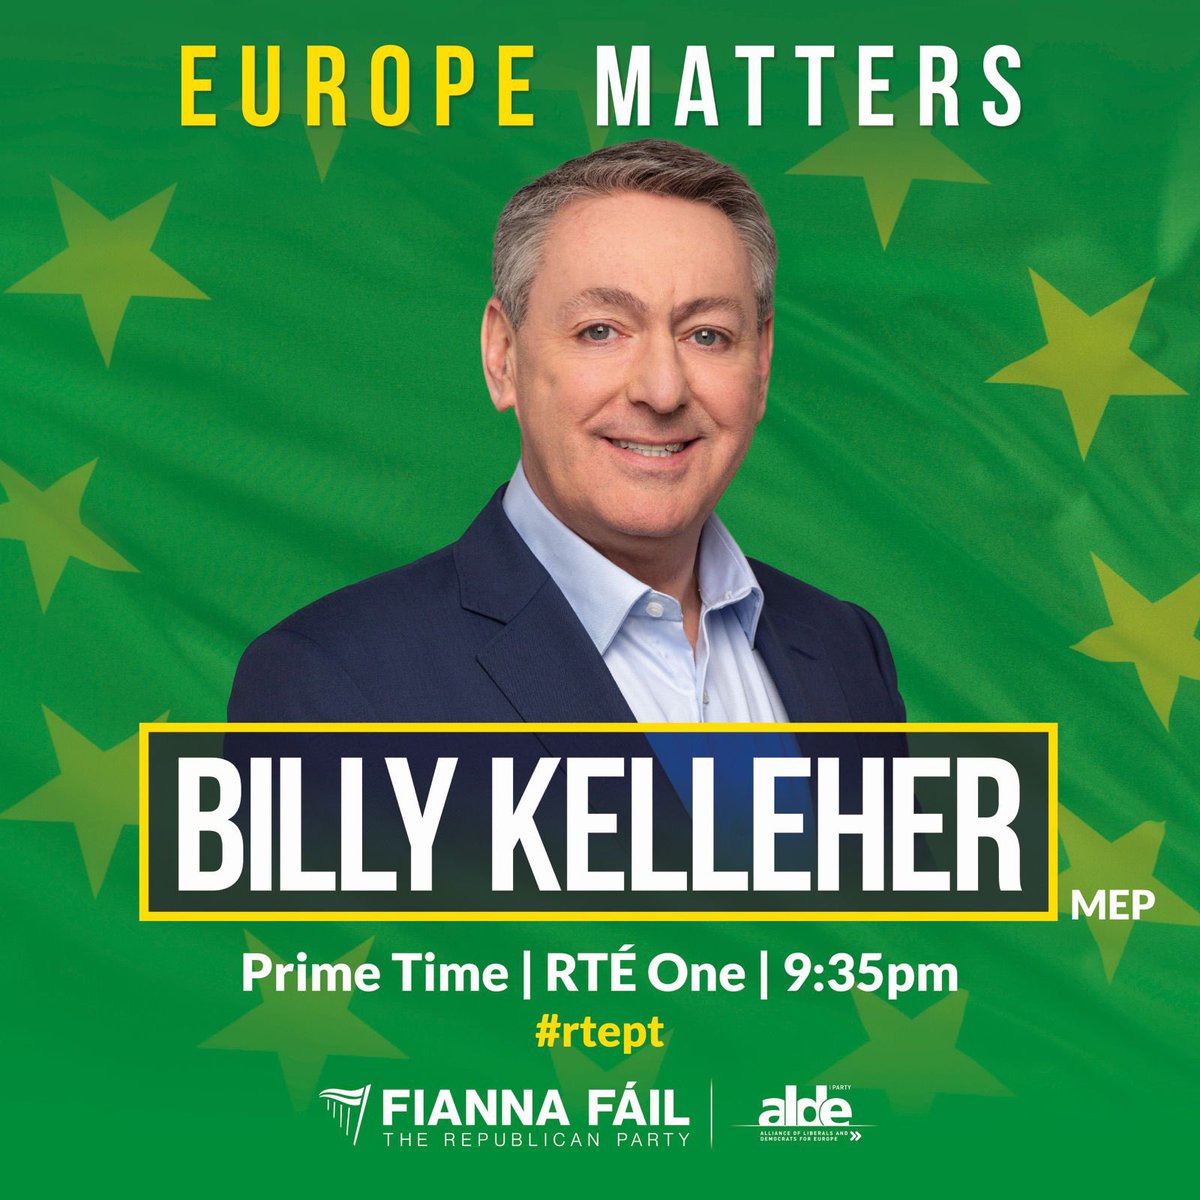 Tune in to the Ireland South constituency debate tonight from 9.35pm and join the conversation #rtept. @BillyKelleherEU